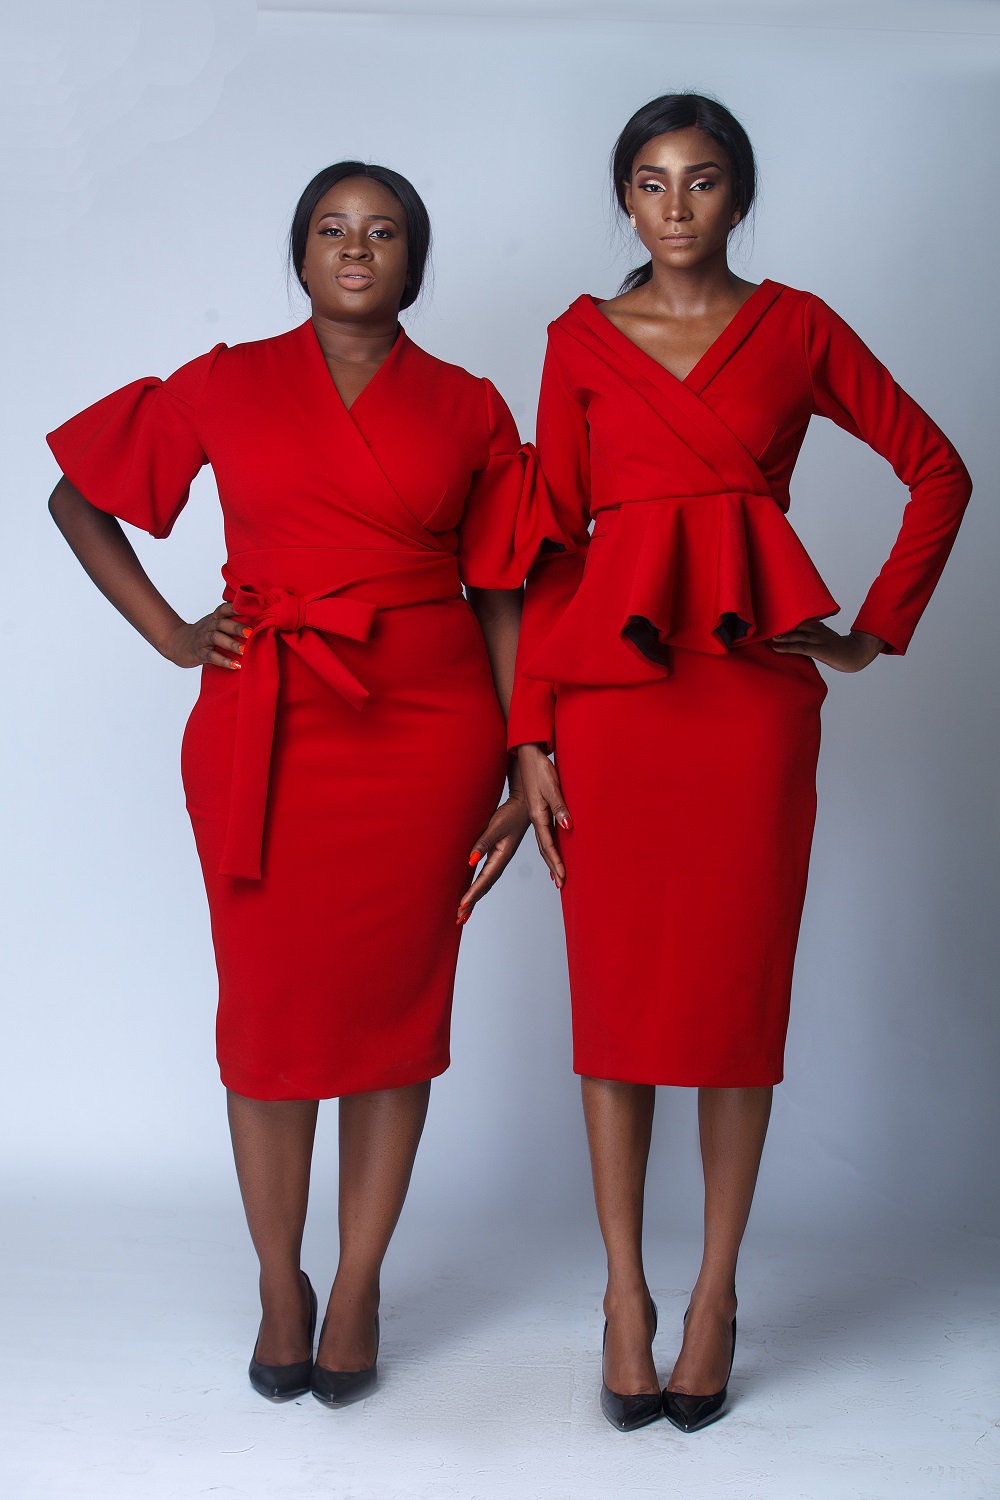 Lady Biba Just Released a Stylish New Collection for #LadyBosses